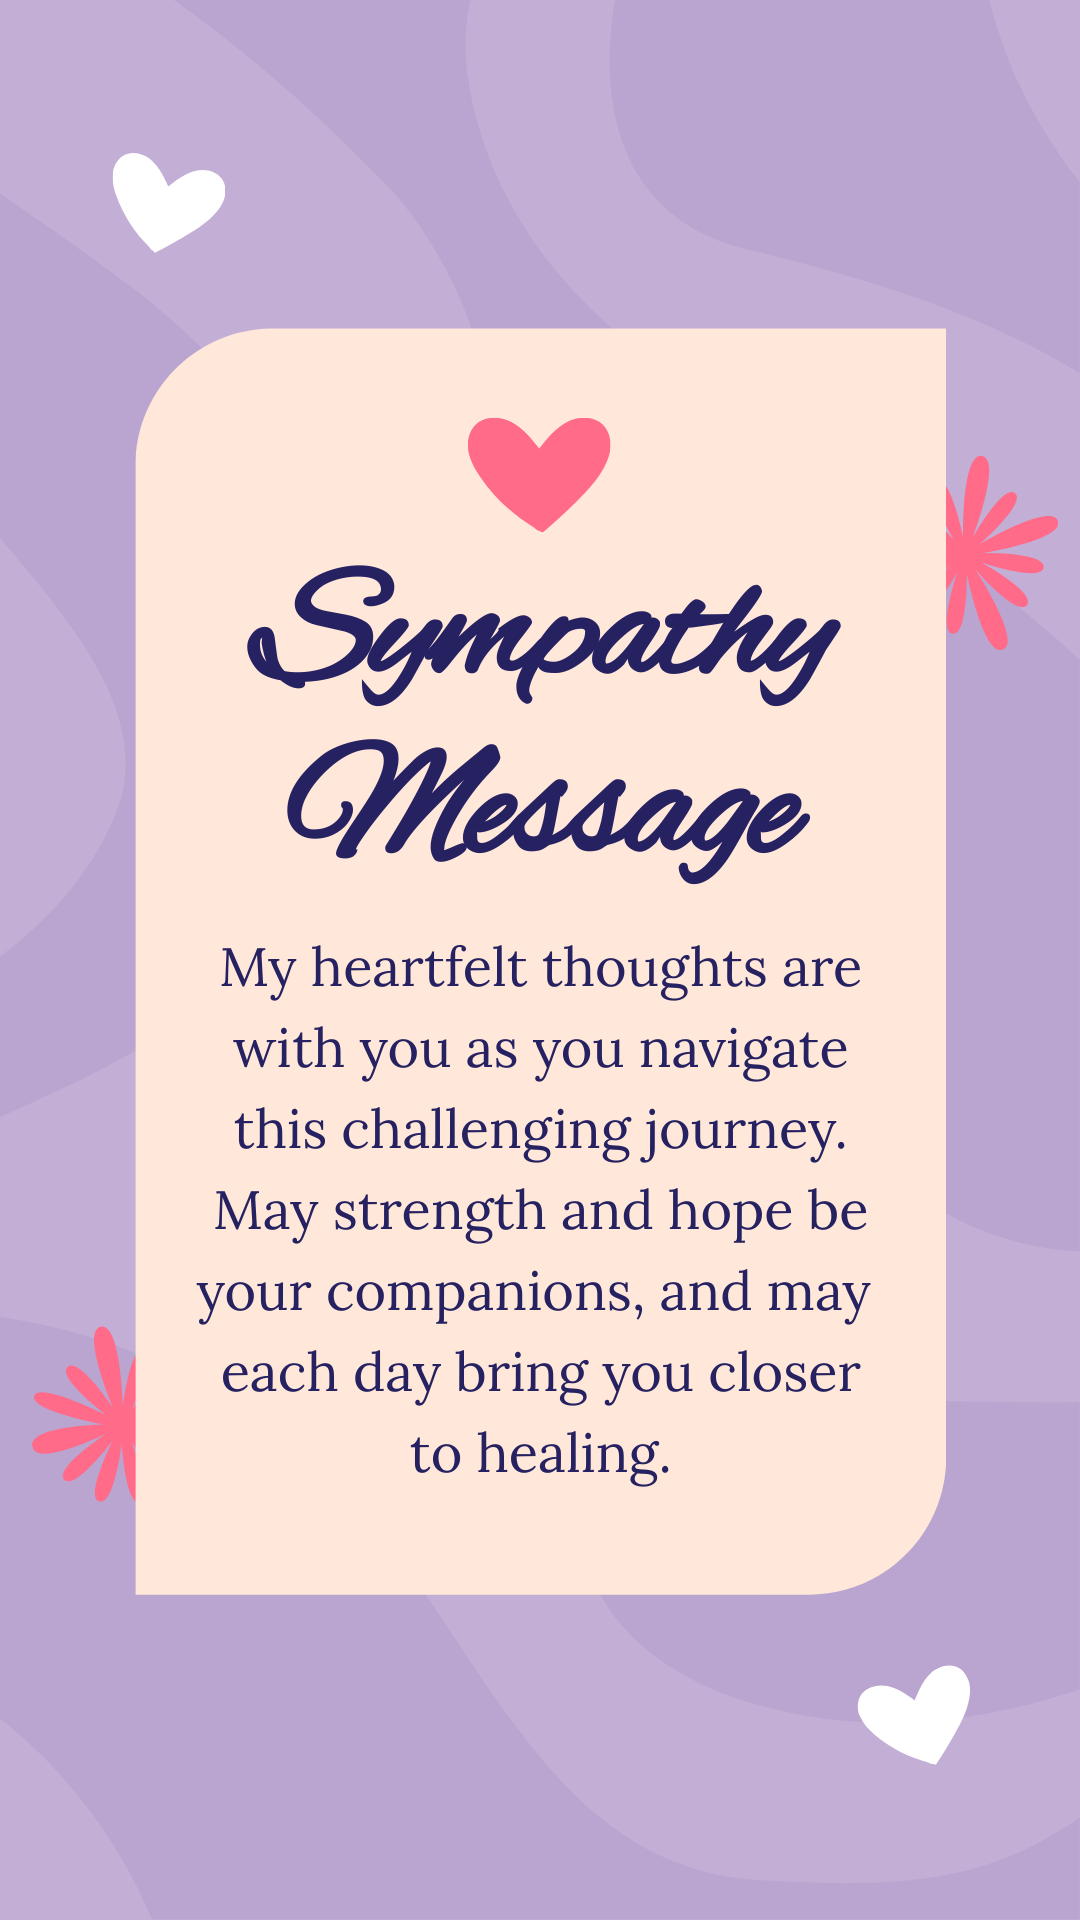 Sympathy Message for Cancer Patient